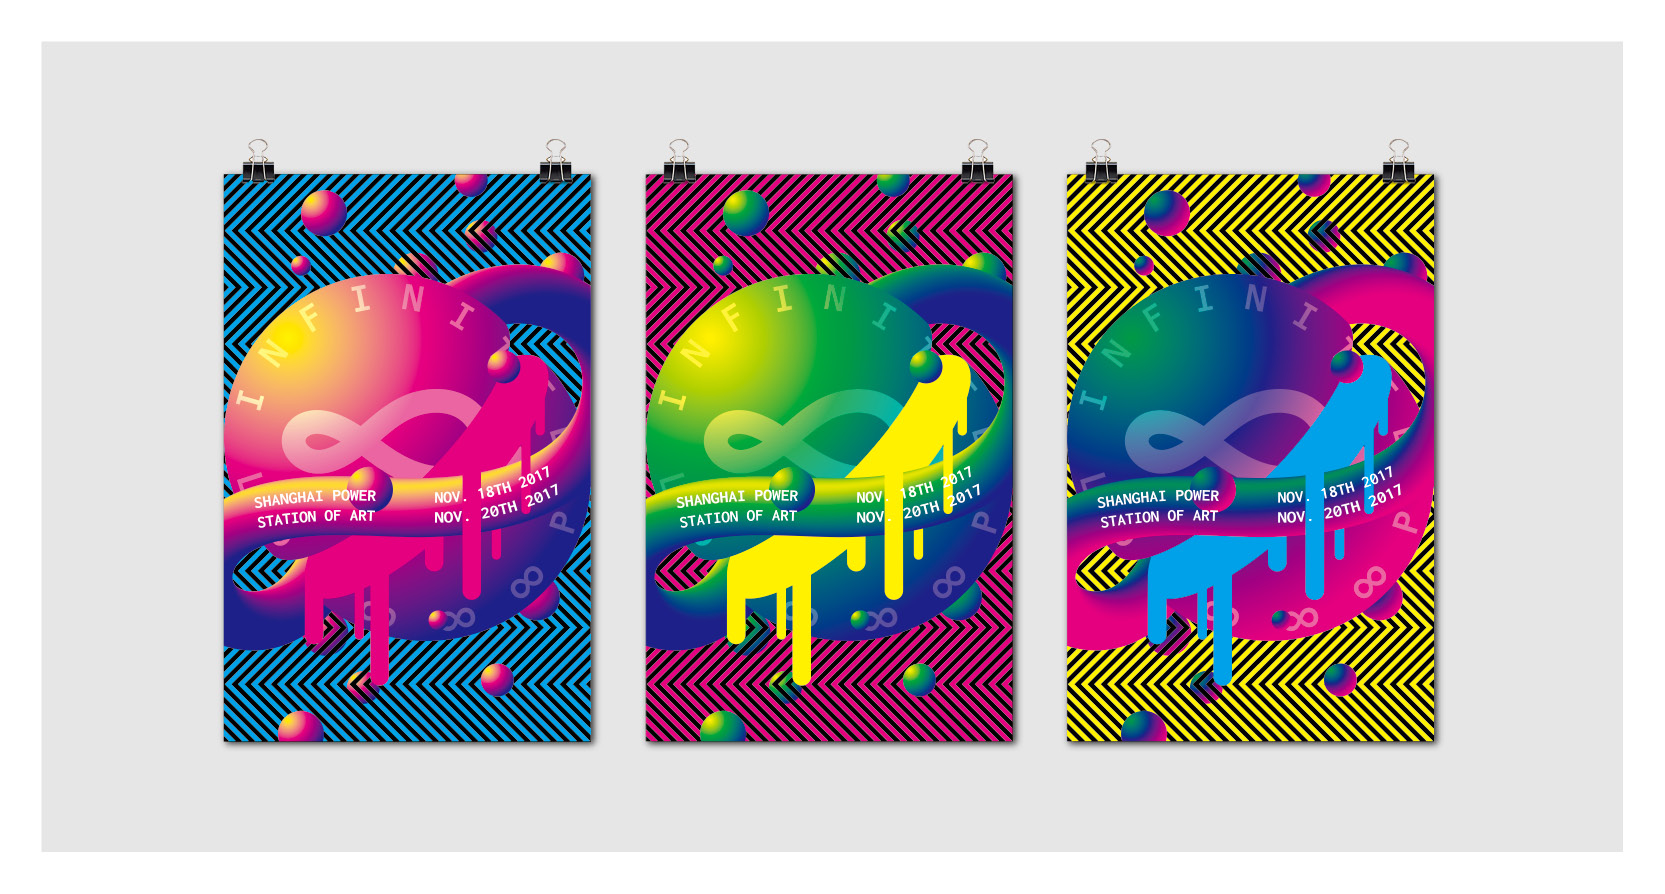 A set of three posters depicting the same gradient colored circle, with roman numerals on it and a 3d infinite sign around it. Each poster has a different set of colors like yellow, red, purple or green, yellow, blue or green, blue, magenta. The background of each poster has a left right chevron pattern.